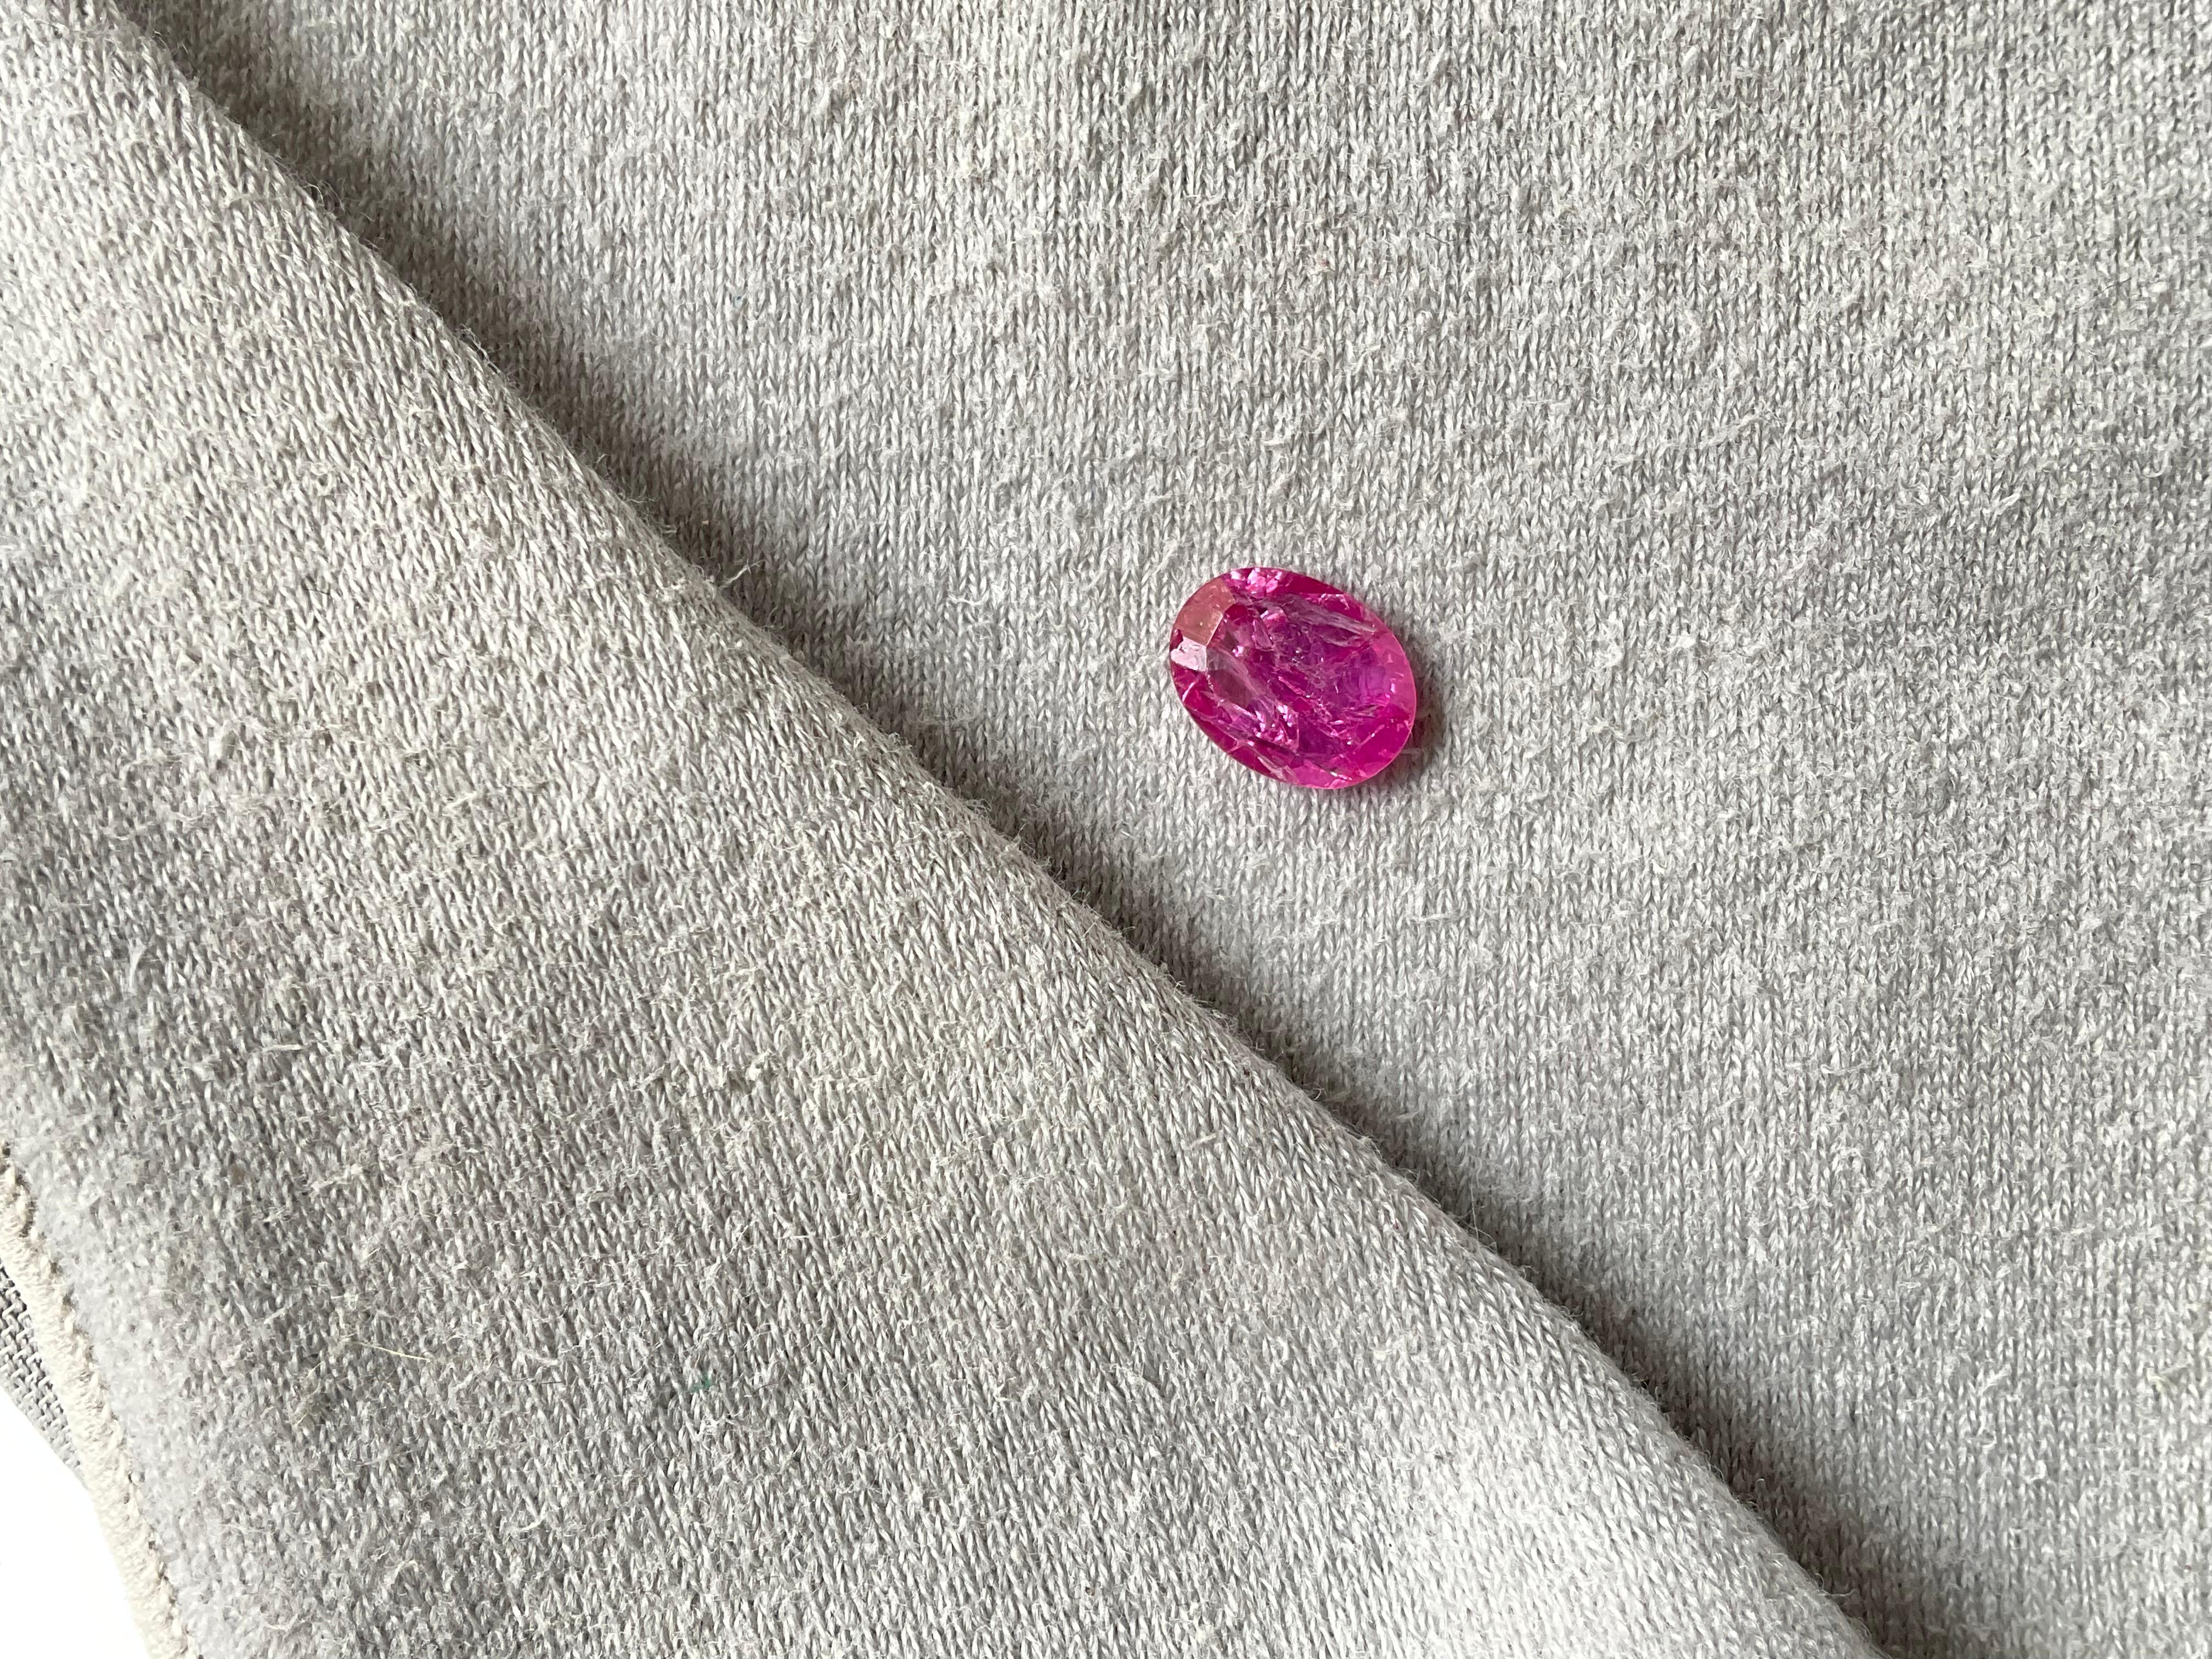 Women's or Men's Certified 2.41 Carats Mozambique Ruby Oval Faceted Cutstone No Heat Natural Gem For Sale